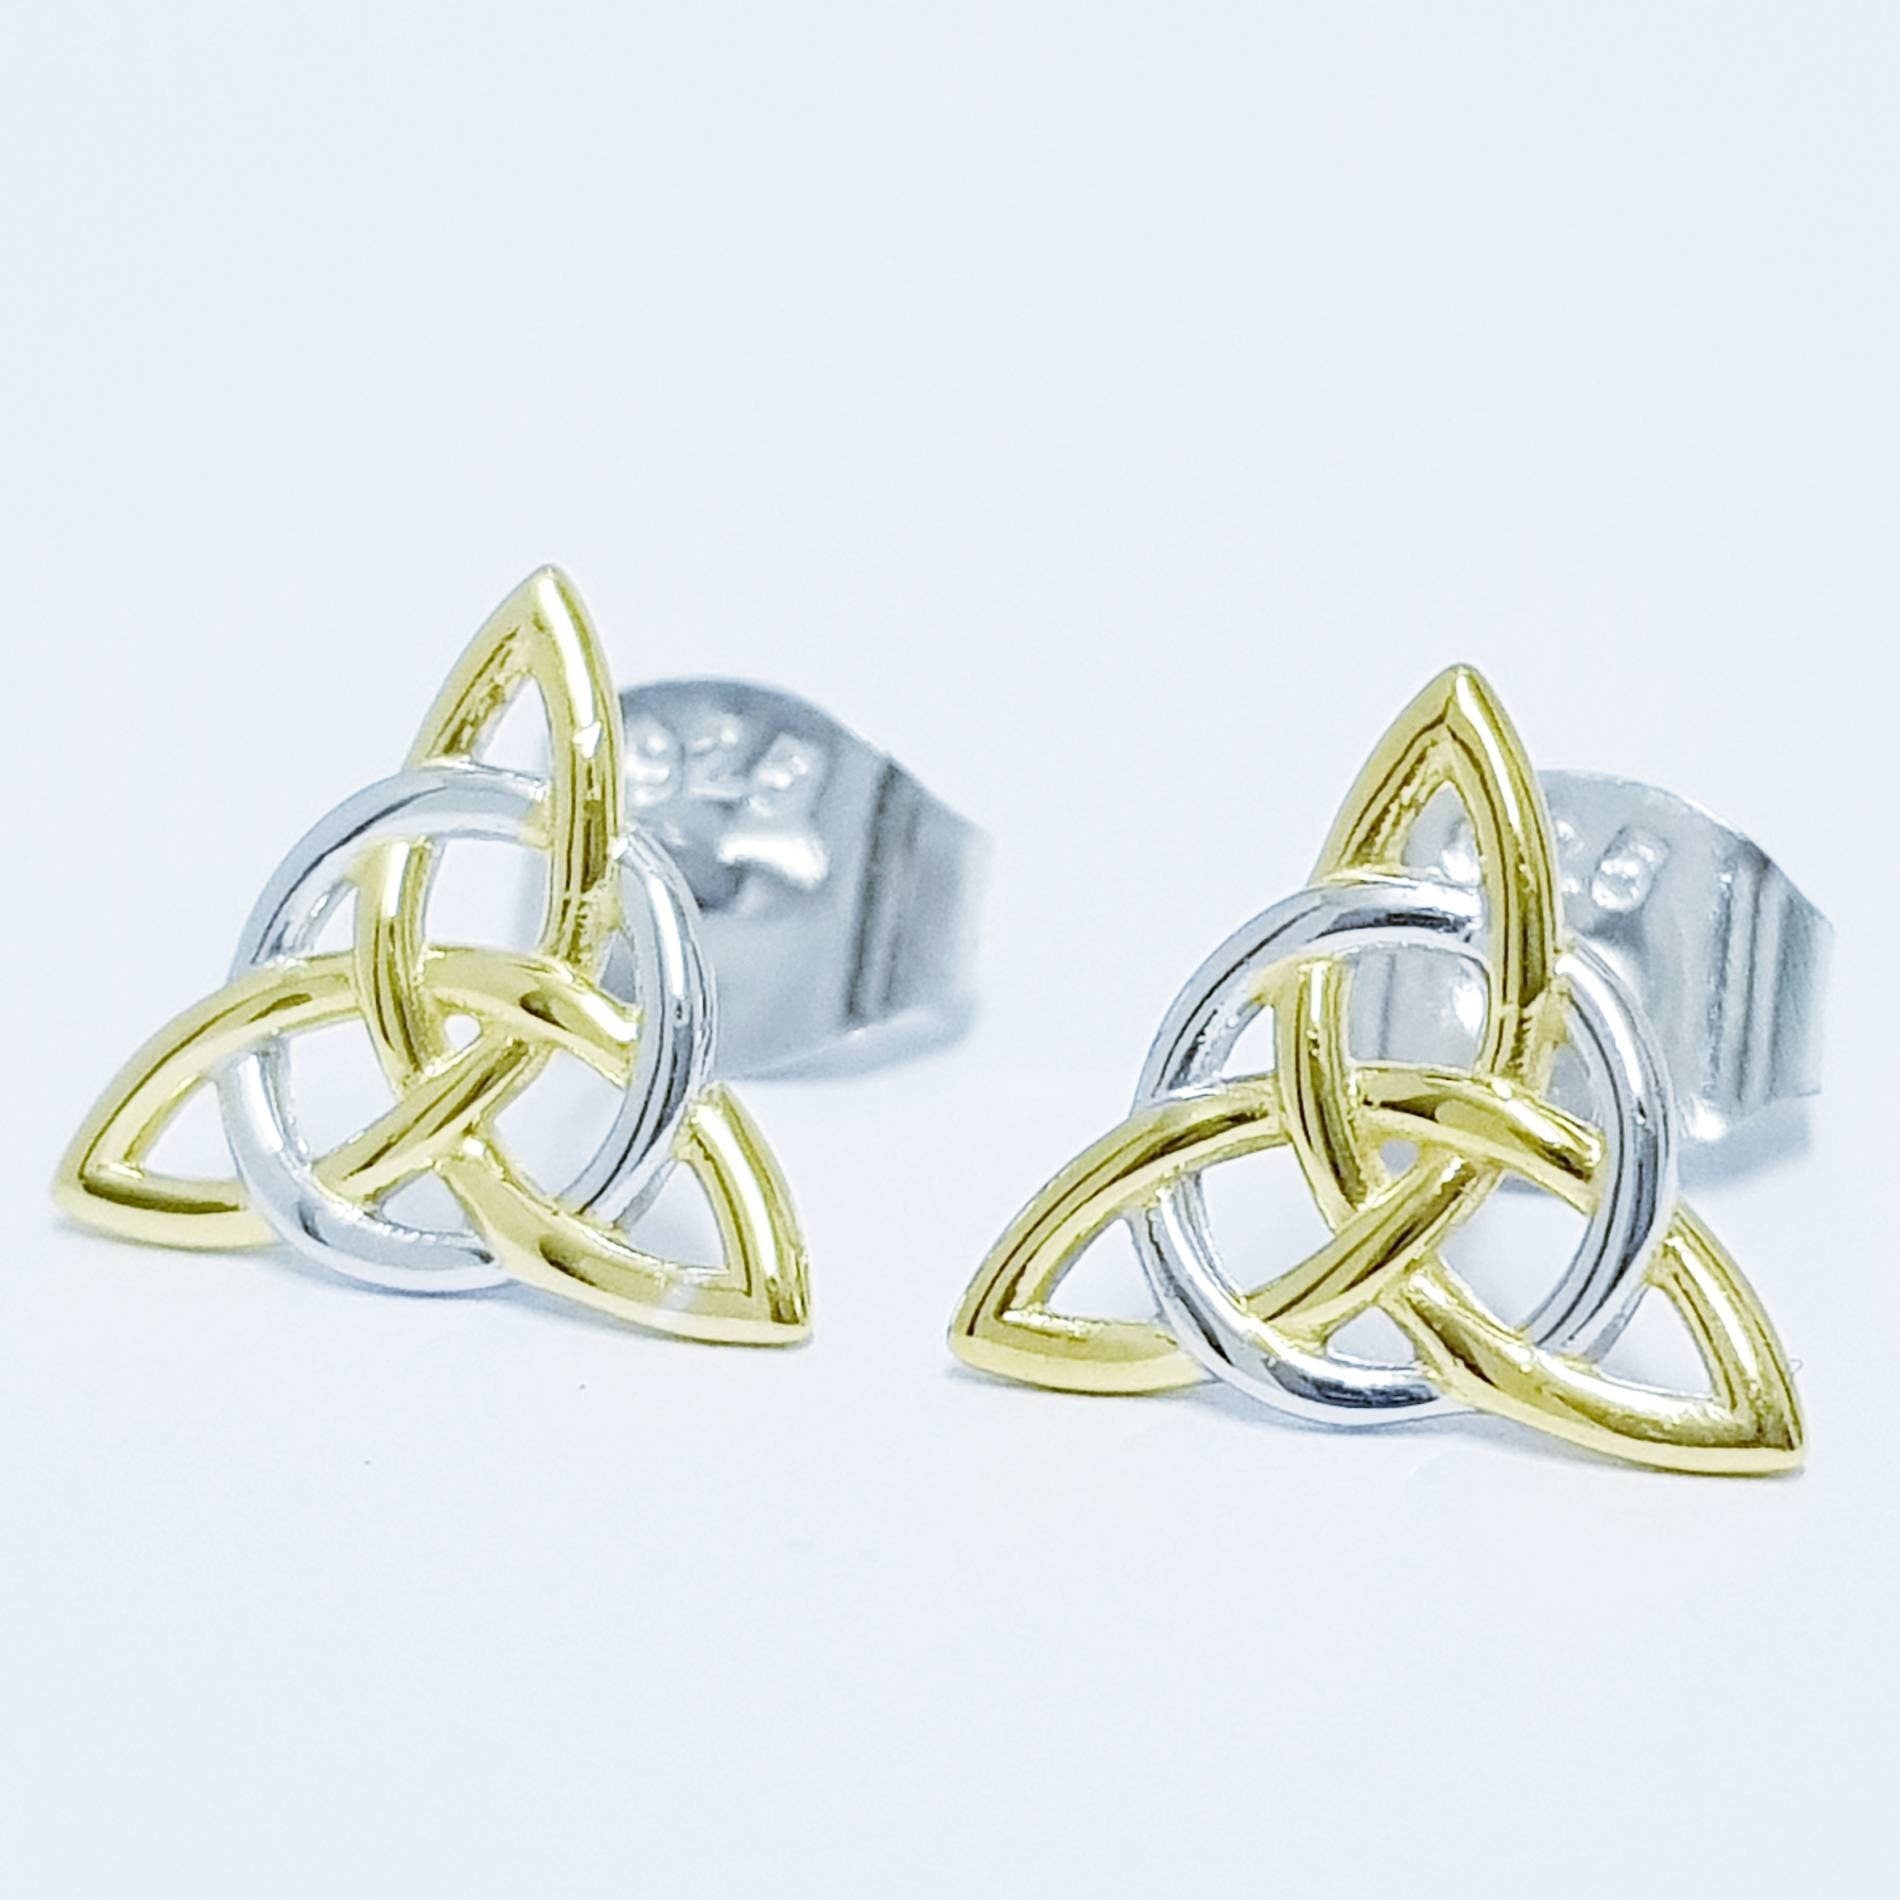 Celtic stud Earrings in silver with yellow gold plating, triquetra stud earrings